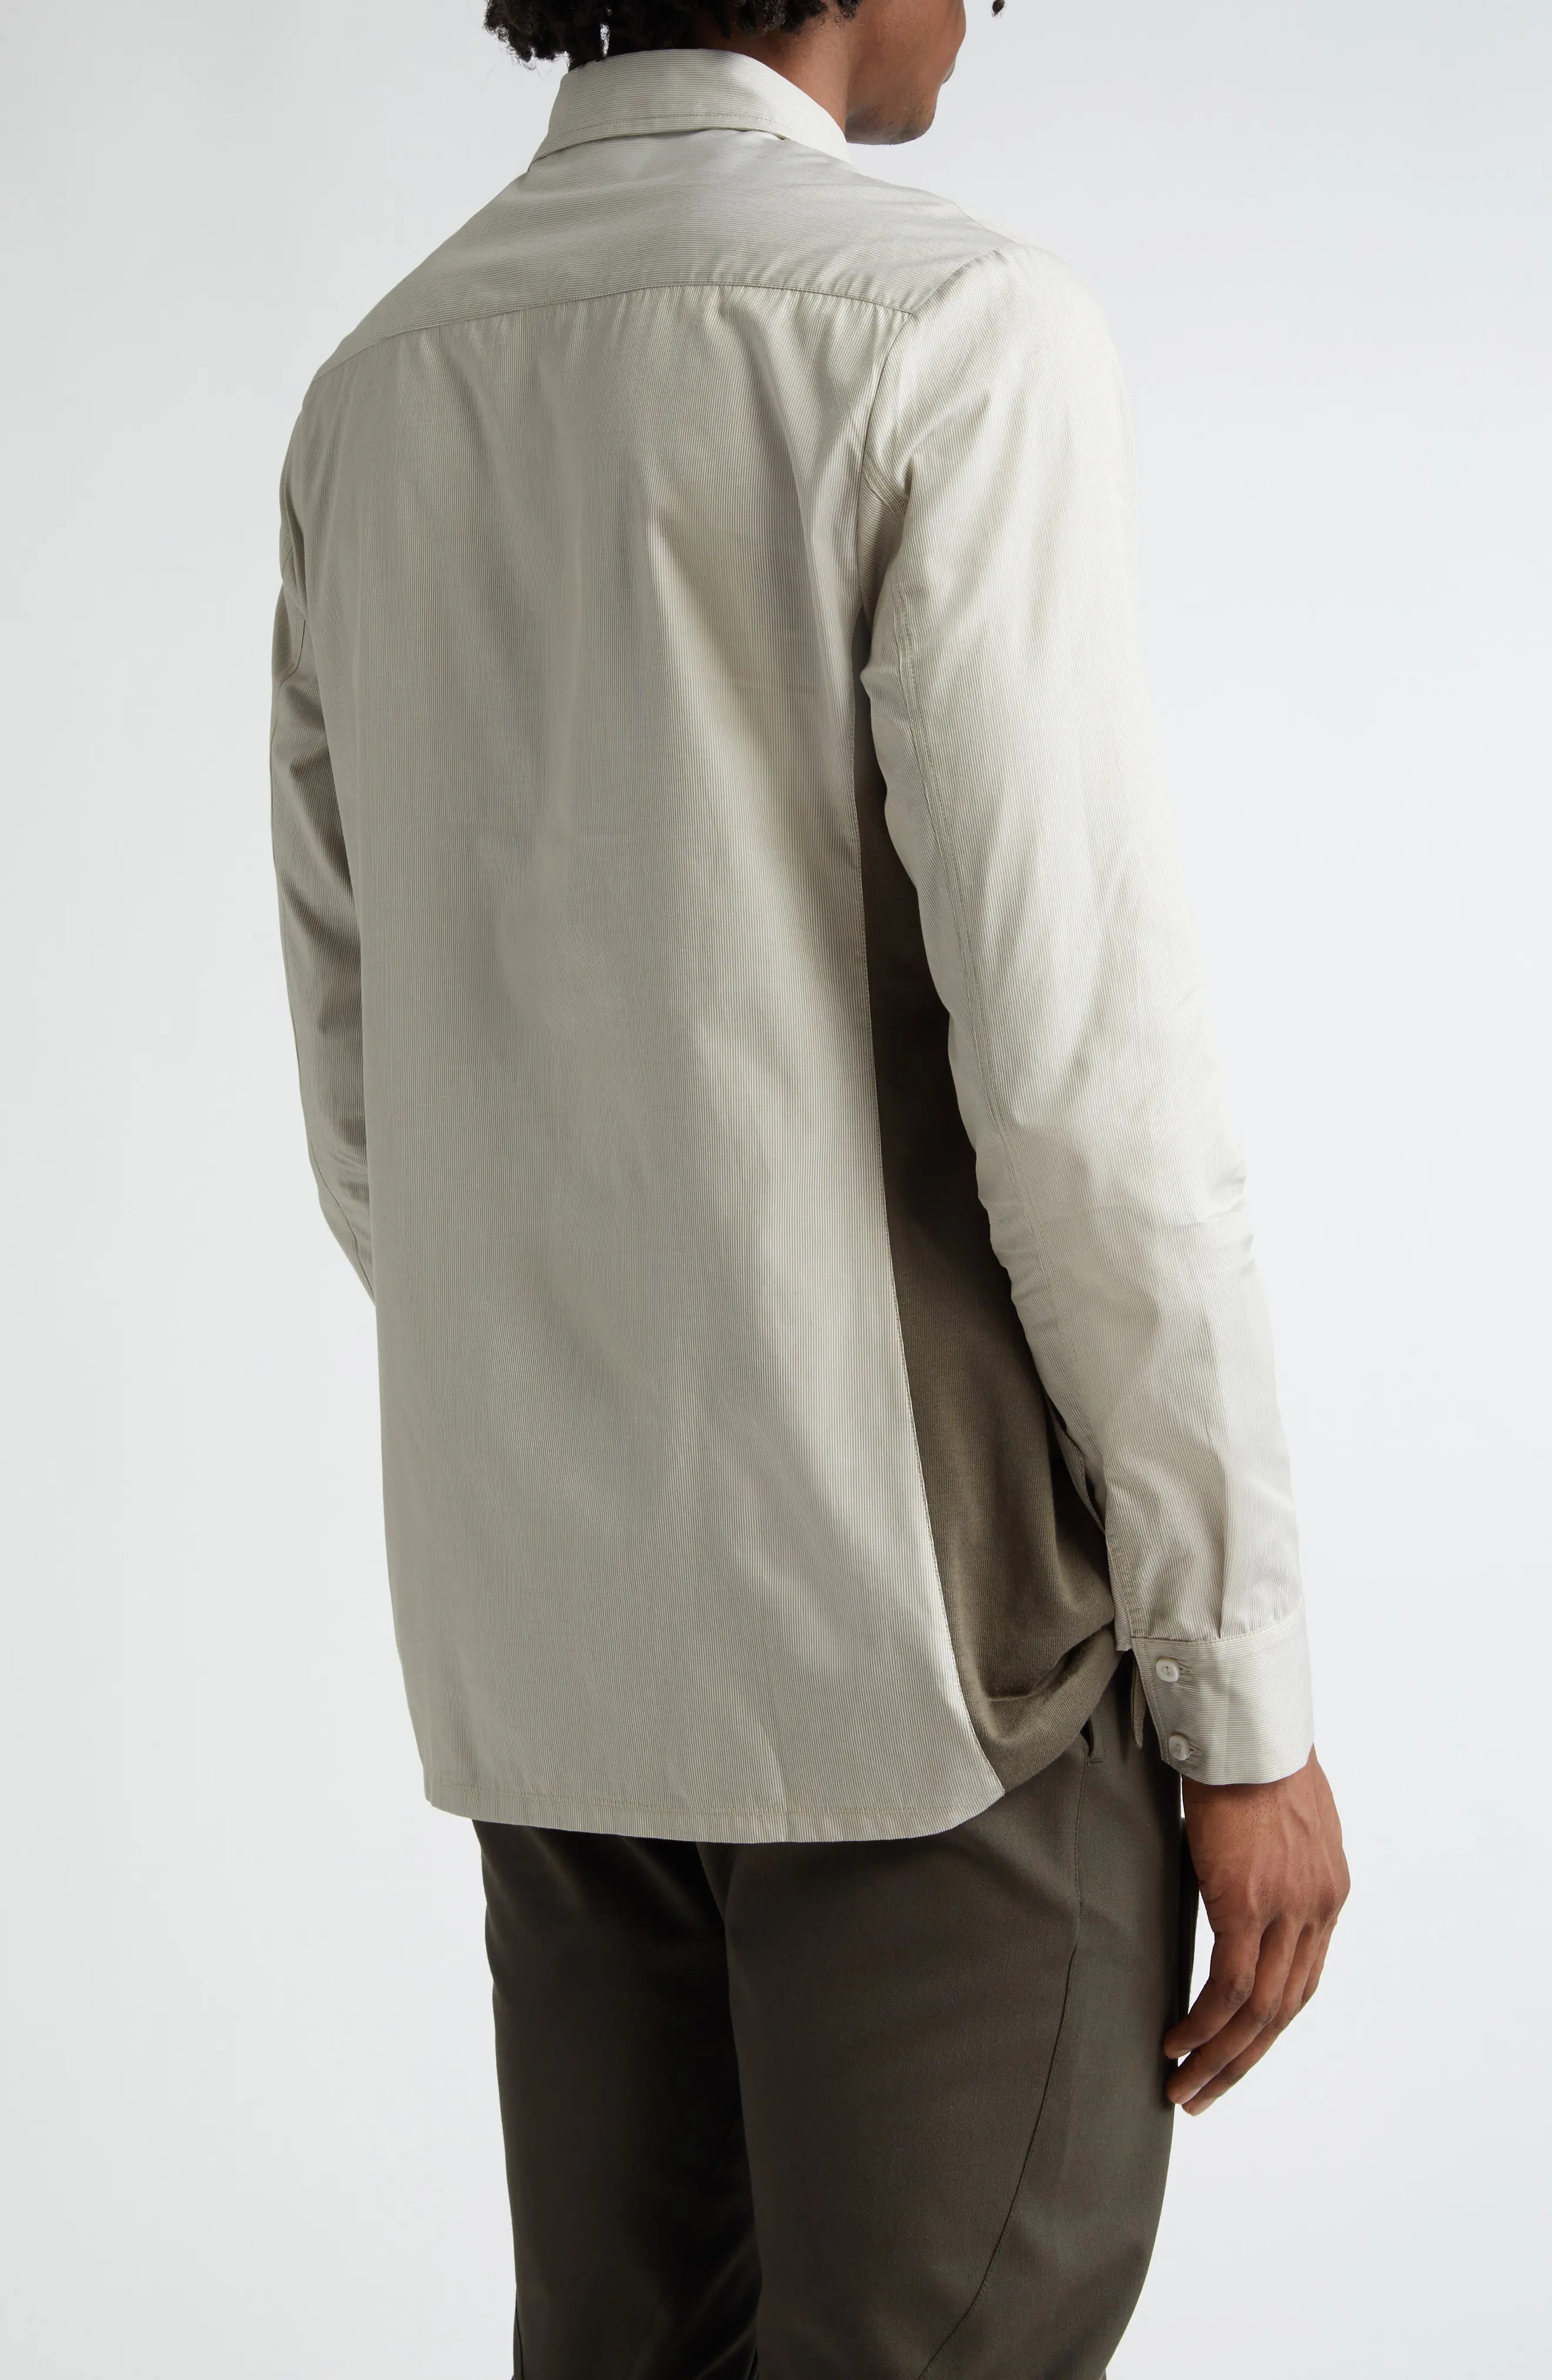 Rino Twisted Jersey Button-Up Shirt in Moss Green Stripe /Taupe - 3